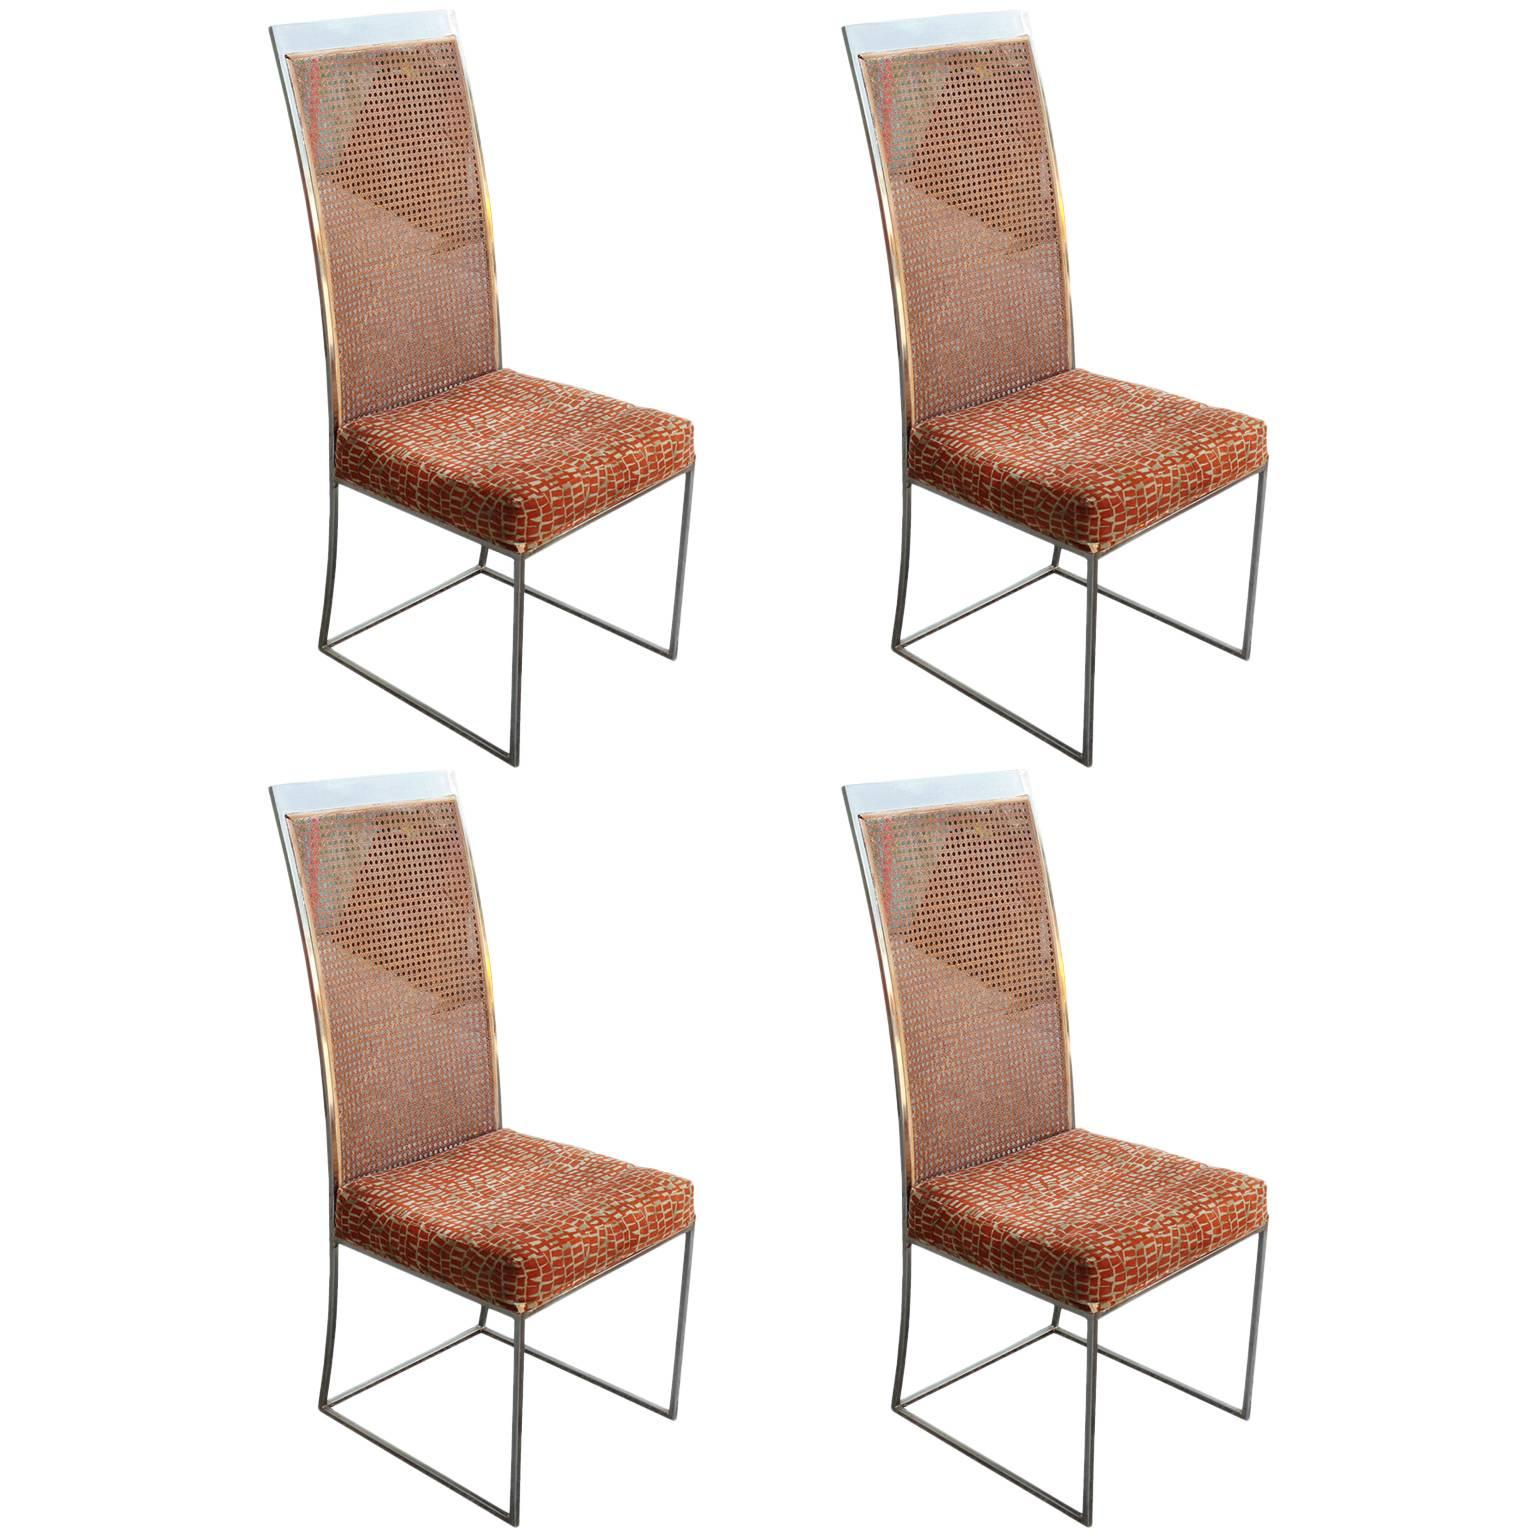 Set of Four Milo Baughman Chrome and Cane Modern Dining Chairs with Chenille